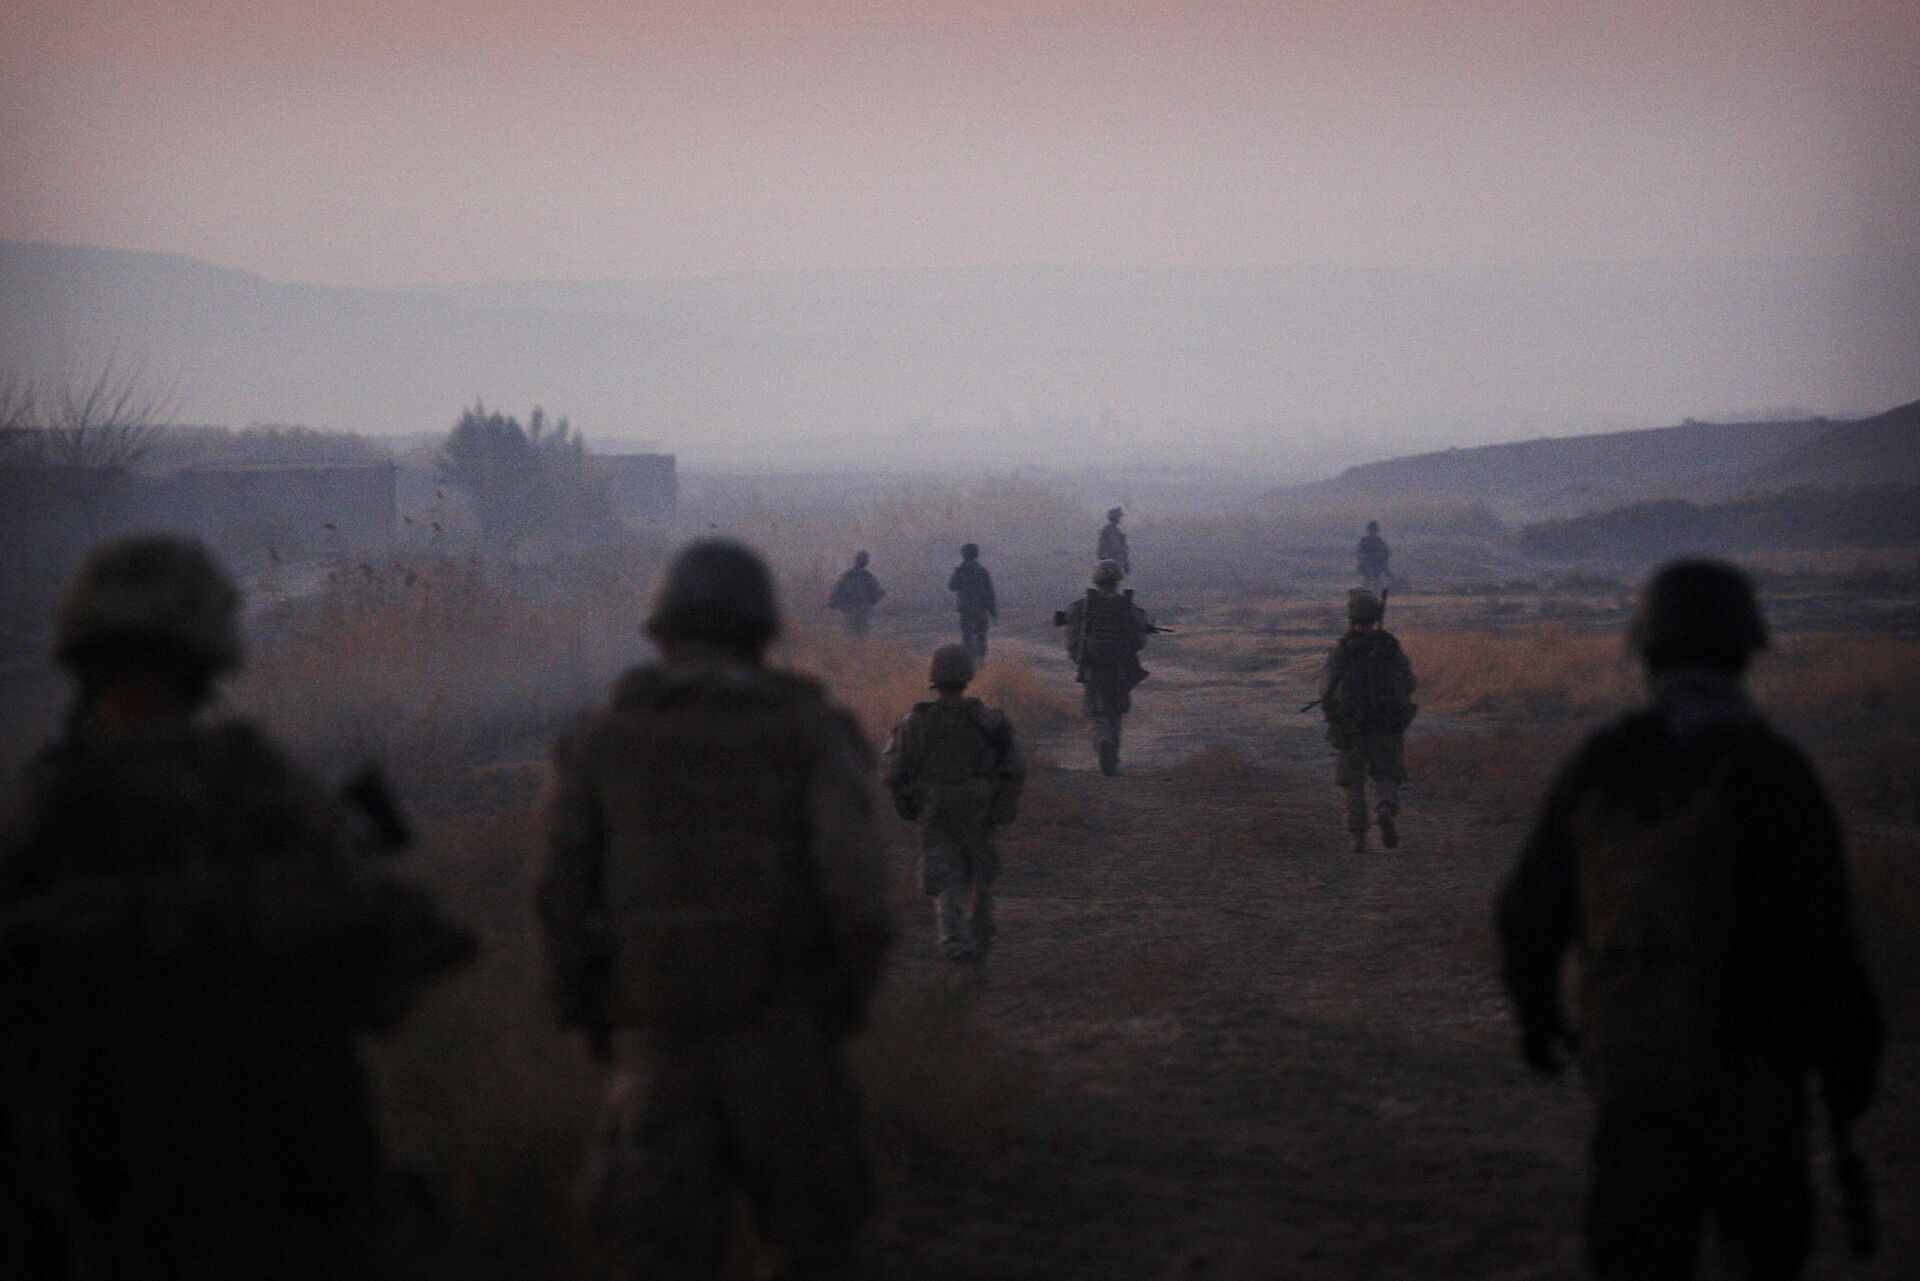 United States Marines from the 2nd Battalion 2nd Marines Warlords and Afghan National Army soldiers walk in formation during an operation in the Garmsir district of the volatile Helmand province, southern Afghanistan, Wednesday, Dec. 23, 2009 - Sputnik International, 1920, 07.09.2021